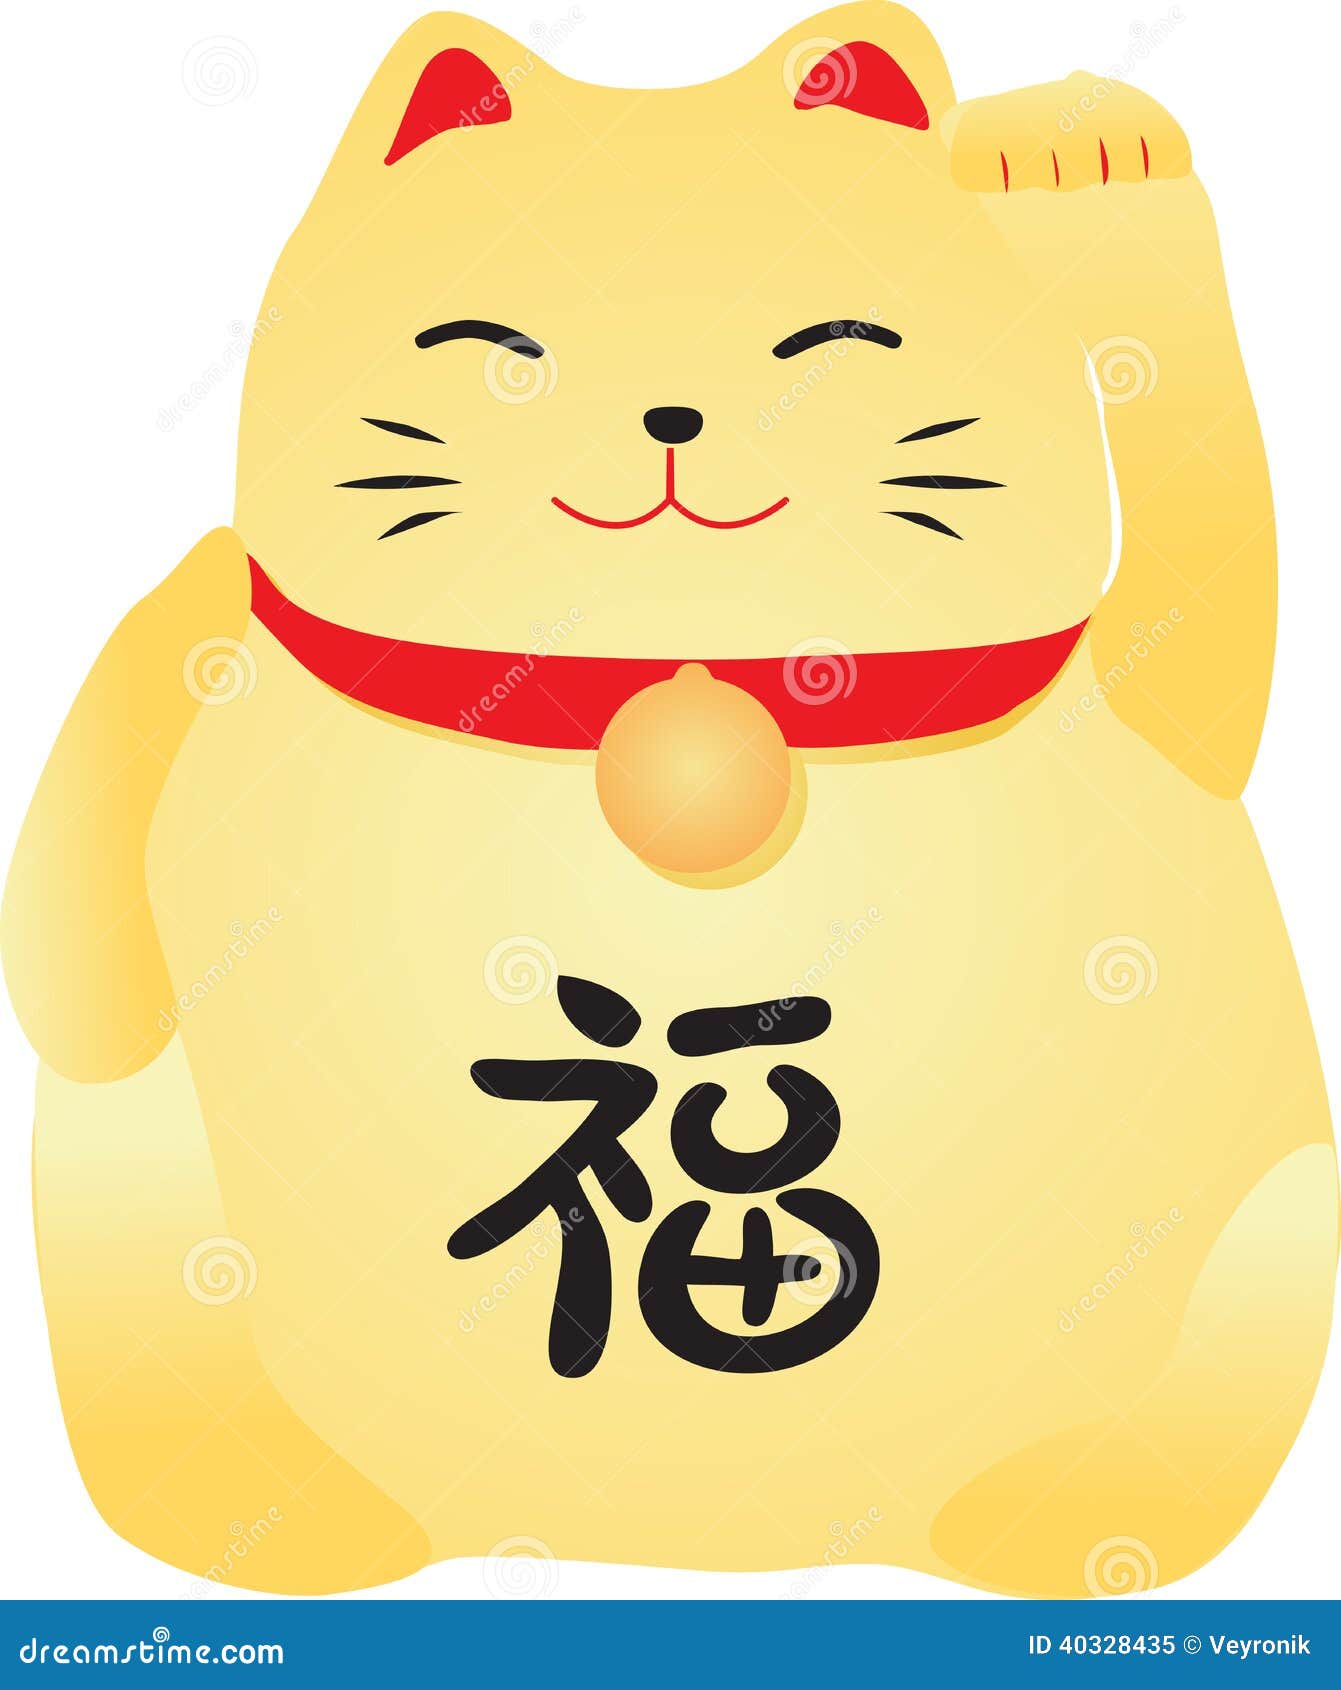 chinese-lucky-cat-traditional-japanese-40328435.jpg